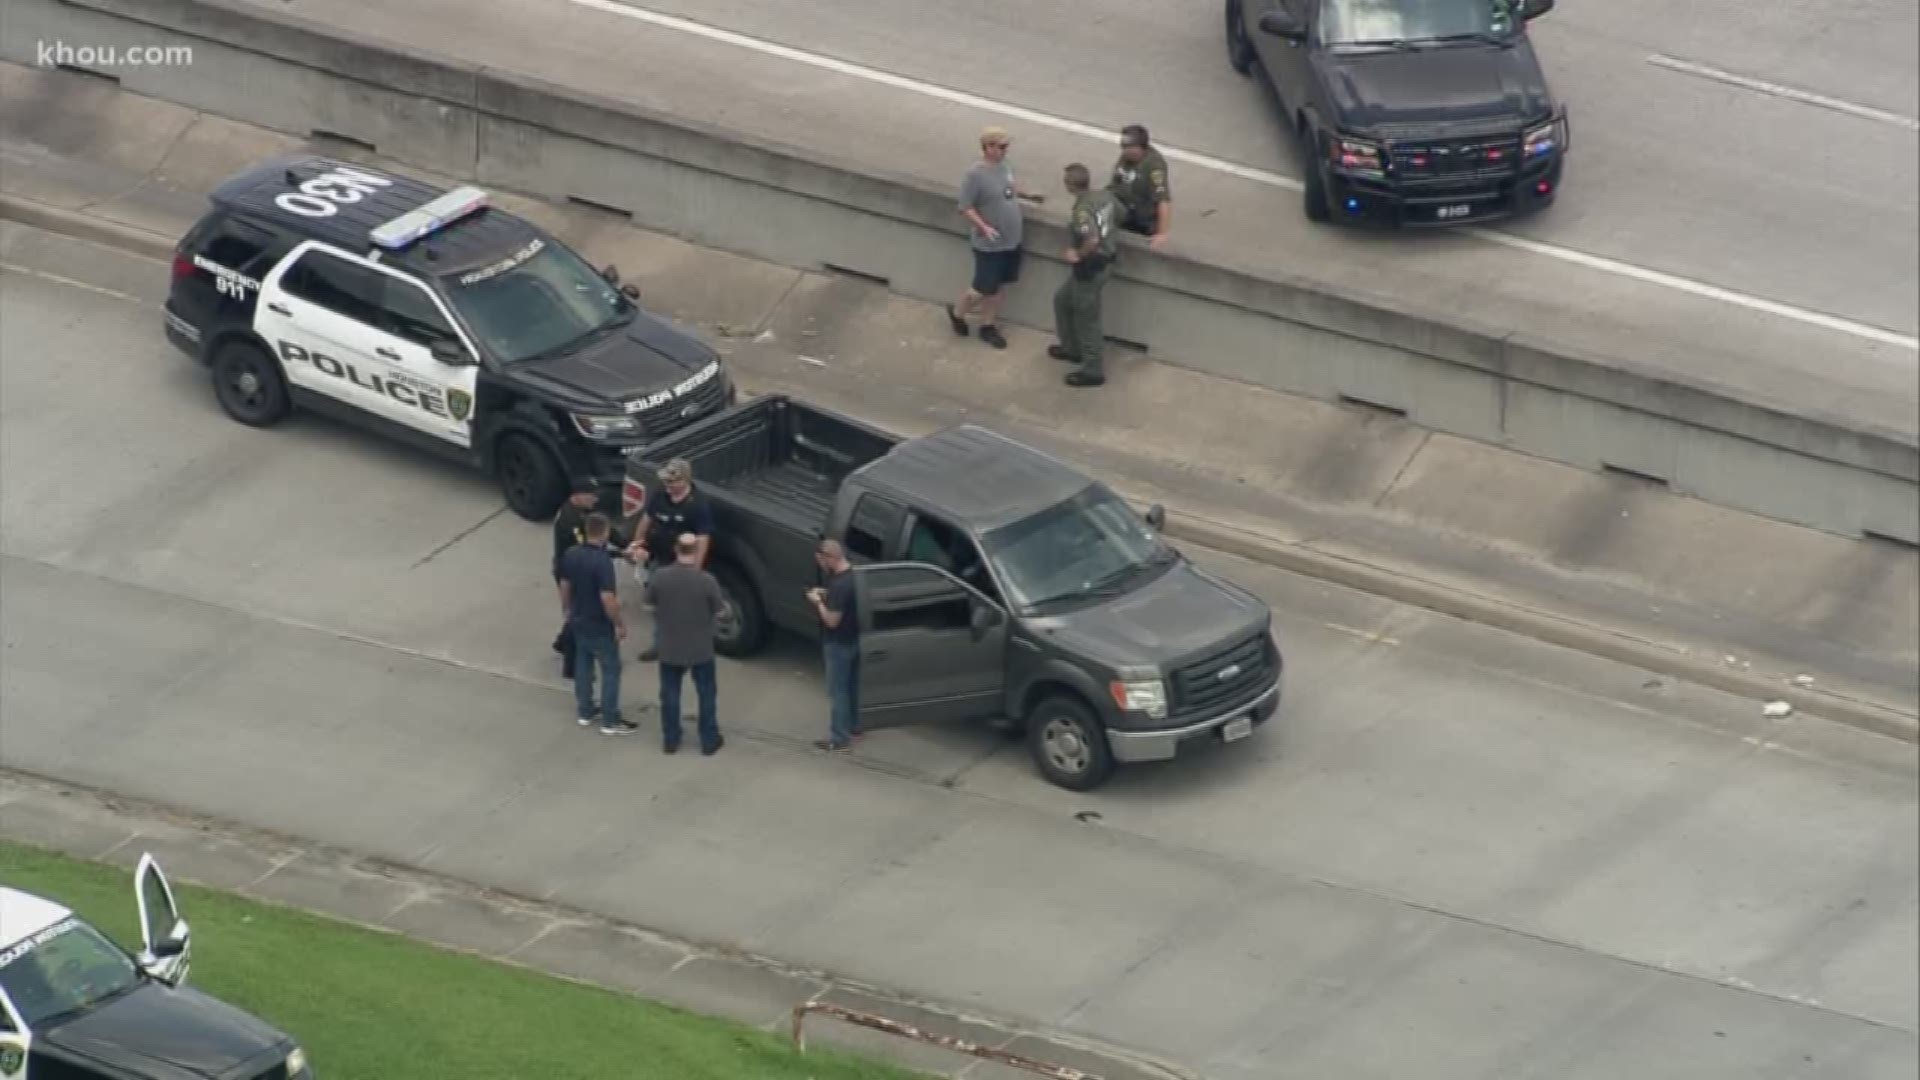 Police were chasing a Ford F-150 for about 40 minutes in southeast Houston. A man and woman have were in the truck and have been detained.